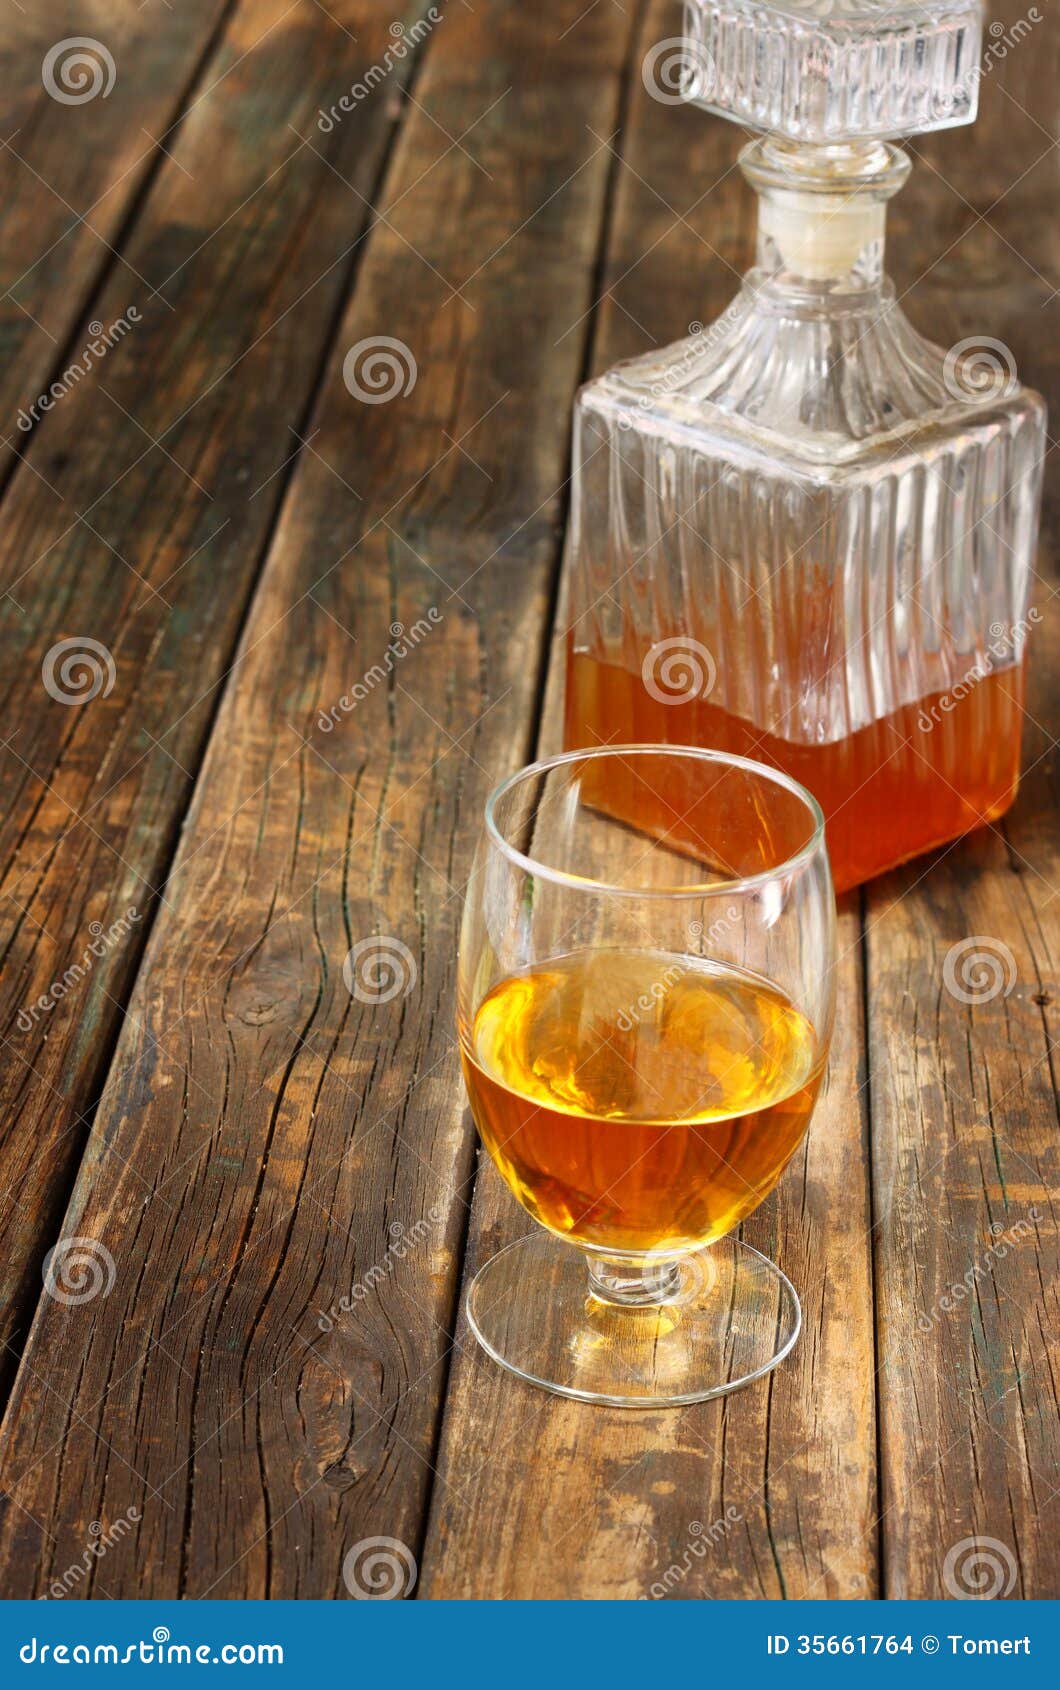 Glass And Bottle Of Liquor Like Scotch, Bourbon, Whiskey Or Brandy On